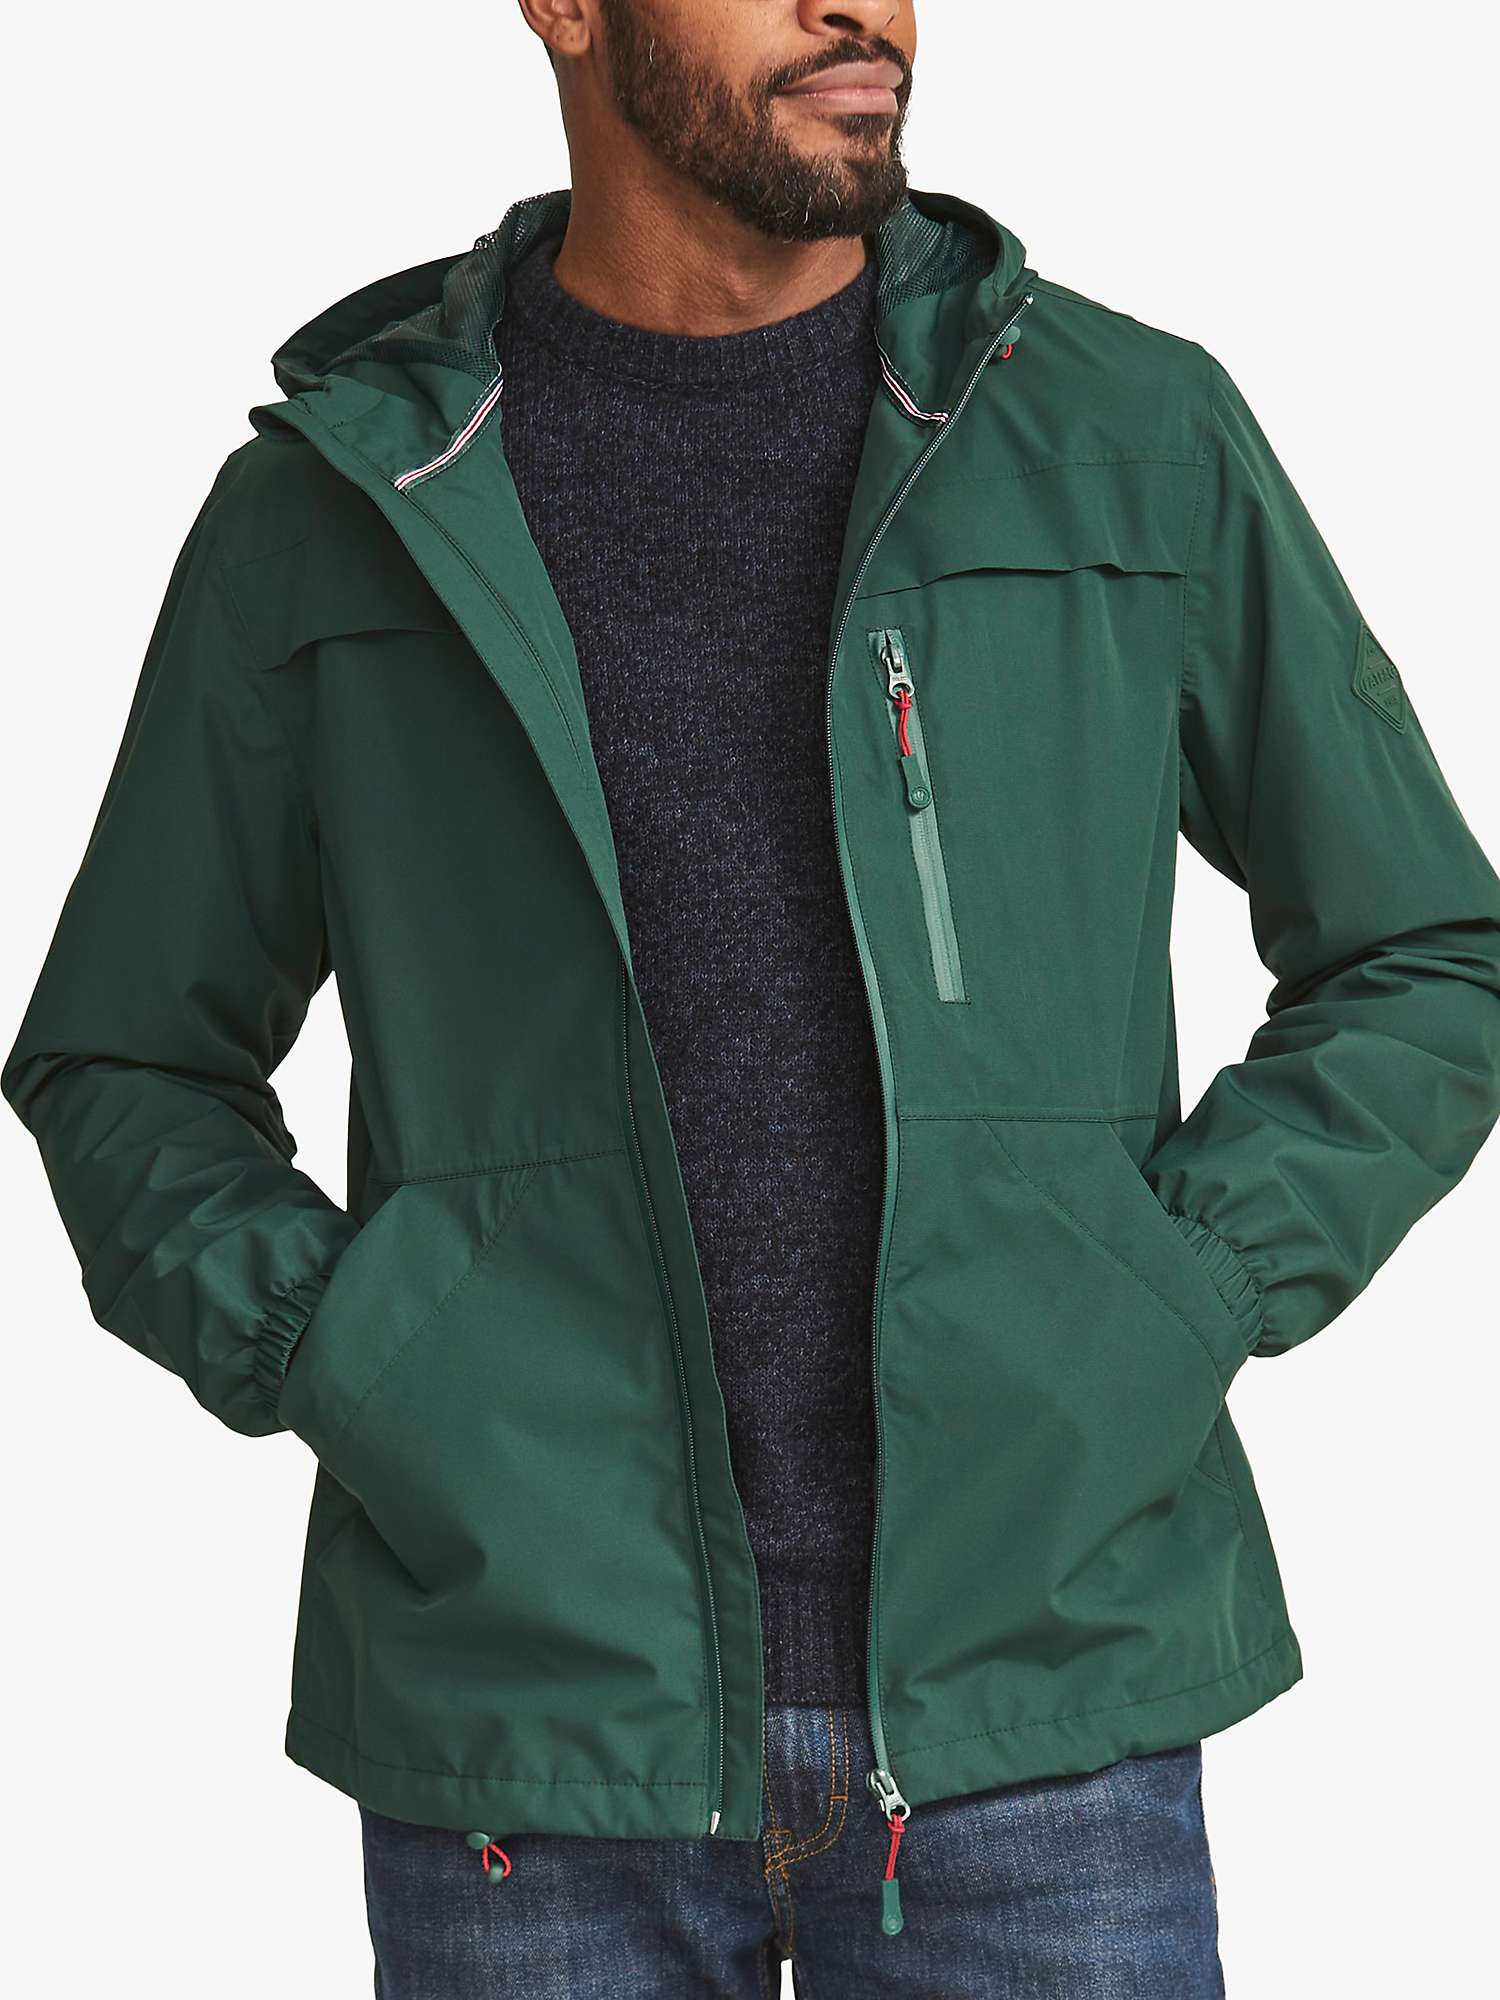 Buy FatFace Performance Hooded Jacket Online at johnlewis.com